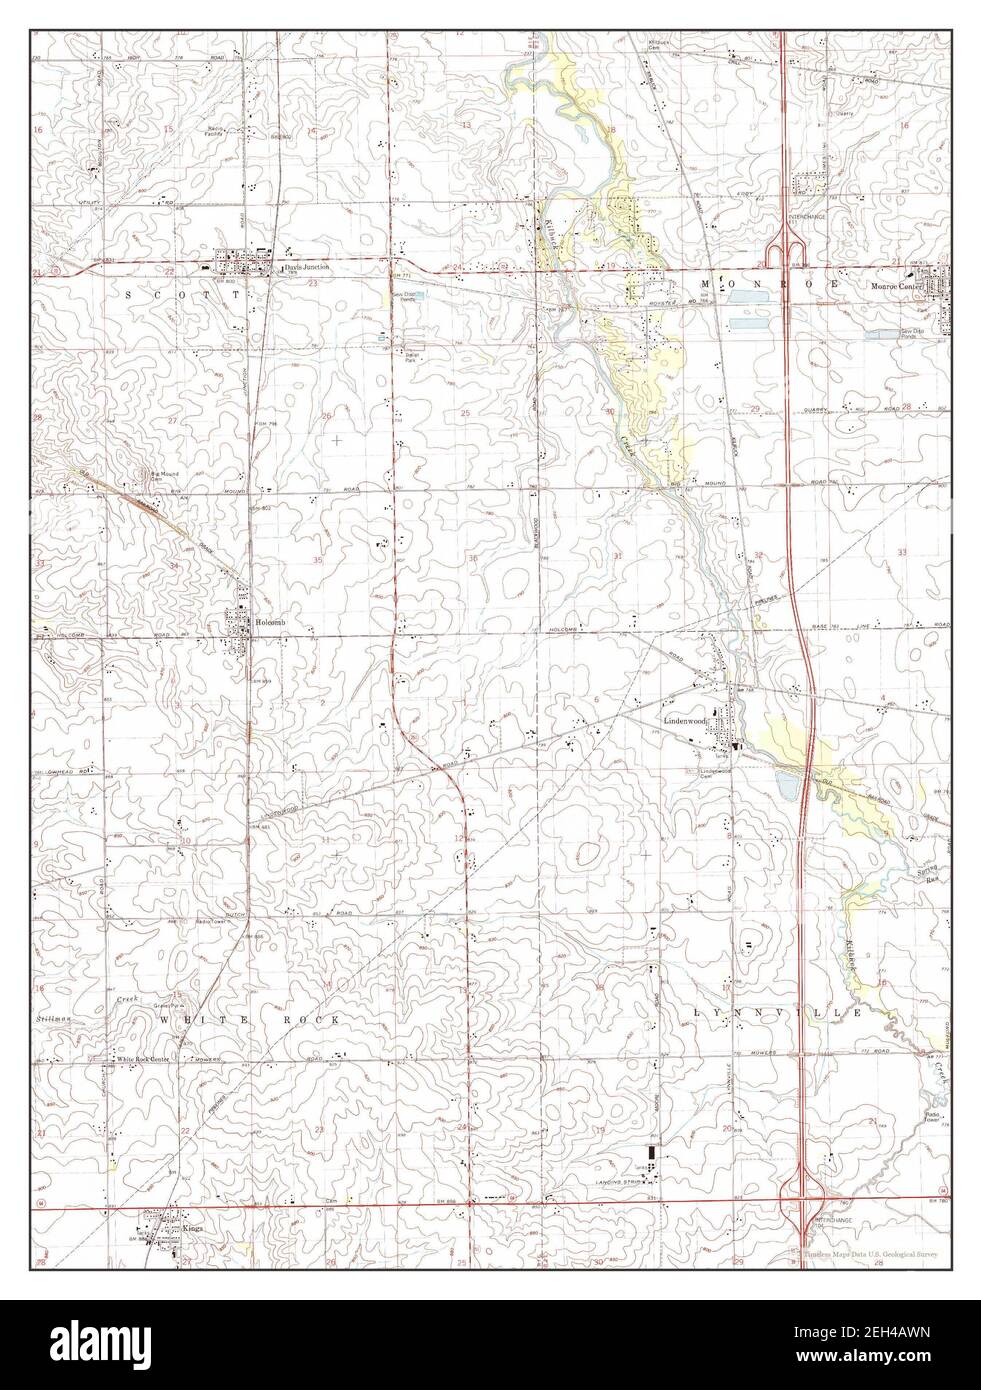 Kings, Illinois, map 1993, 1:24000, United States of America by Timeless Maps, data U.S. Geological Survey Stock Photo